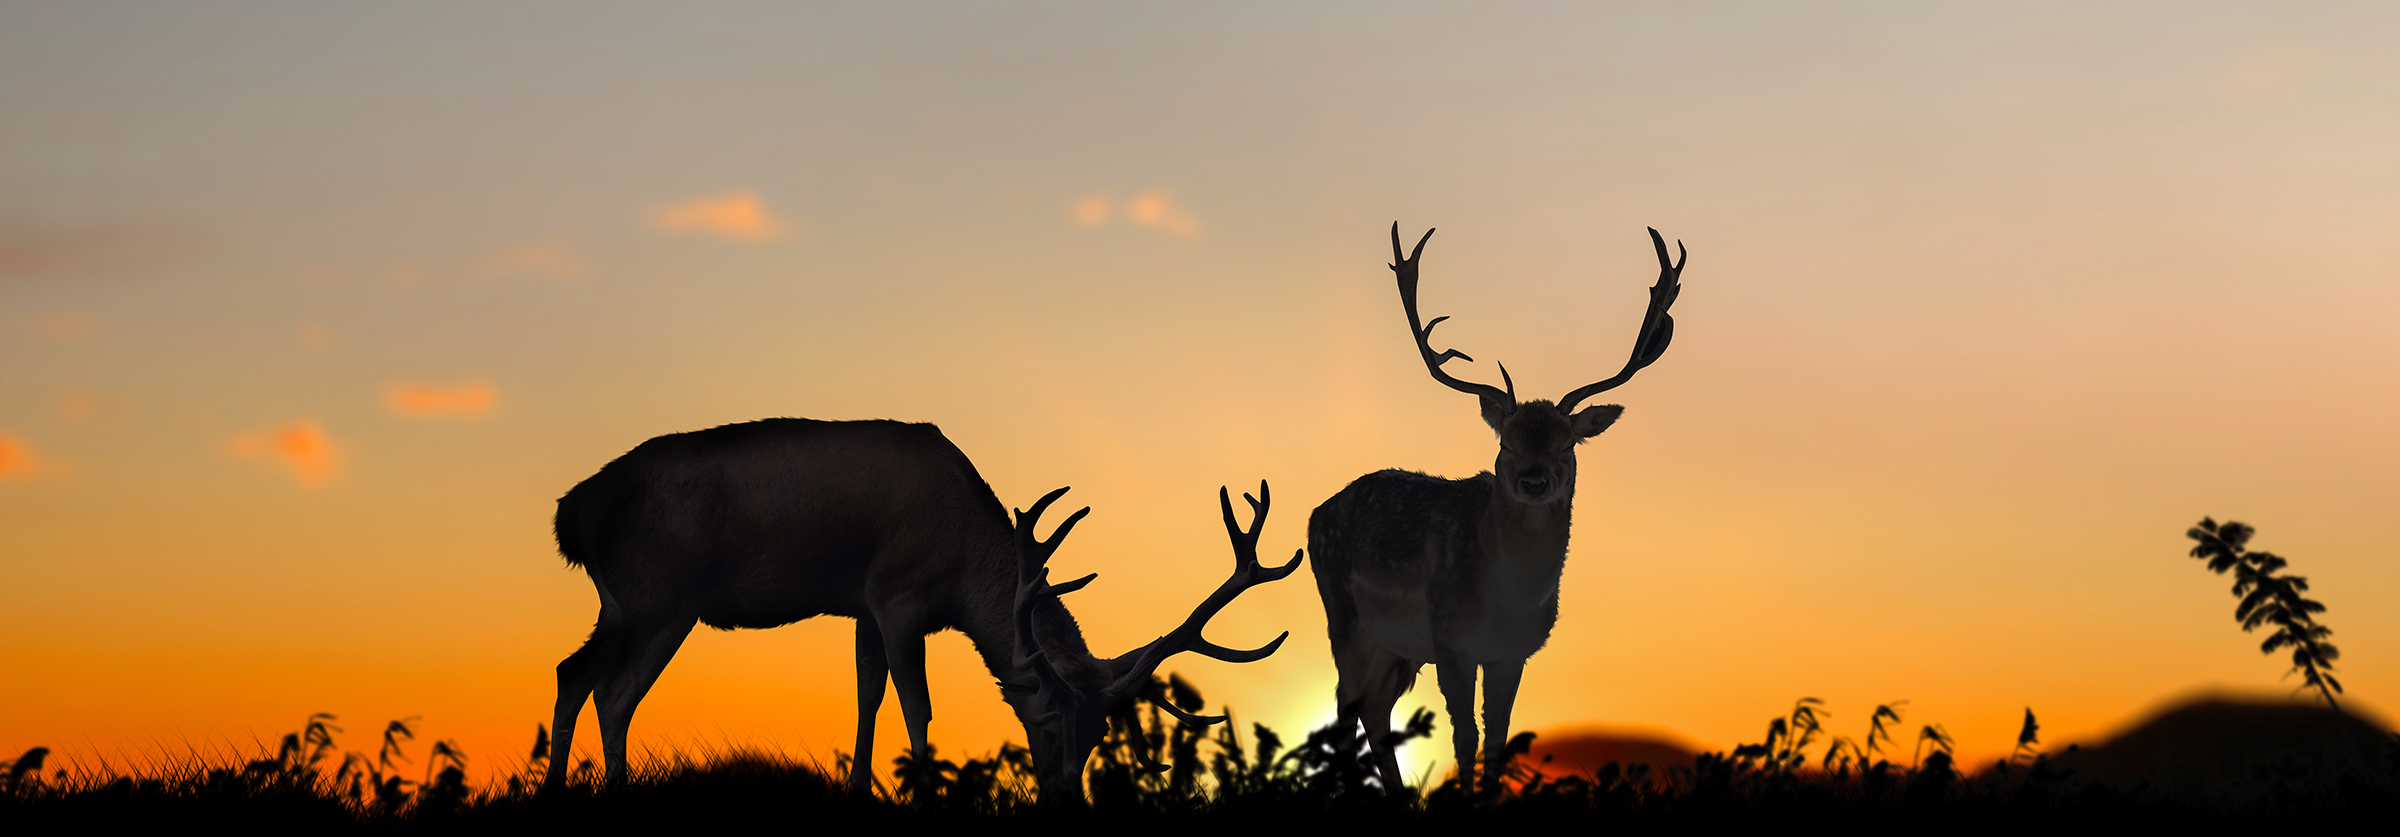 Silhouette of a hunter aiming at a White tail buck against an evening sunset.